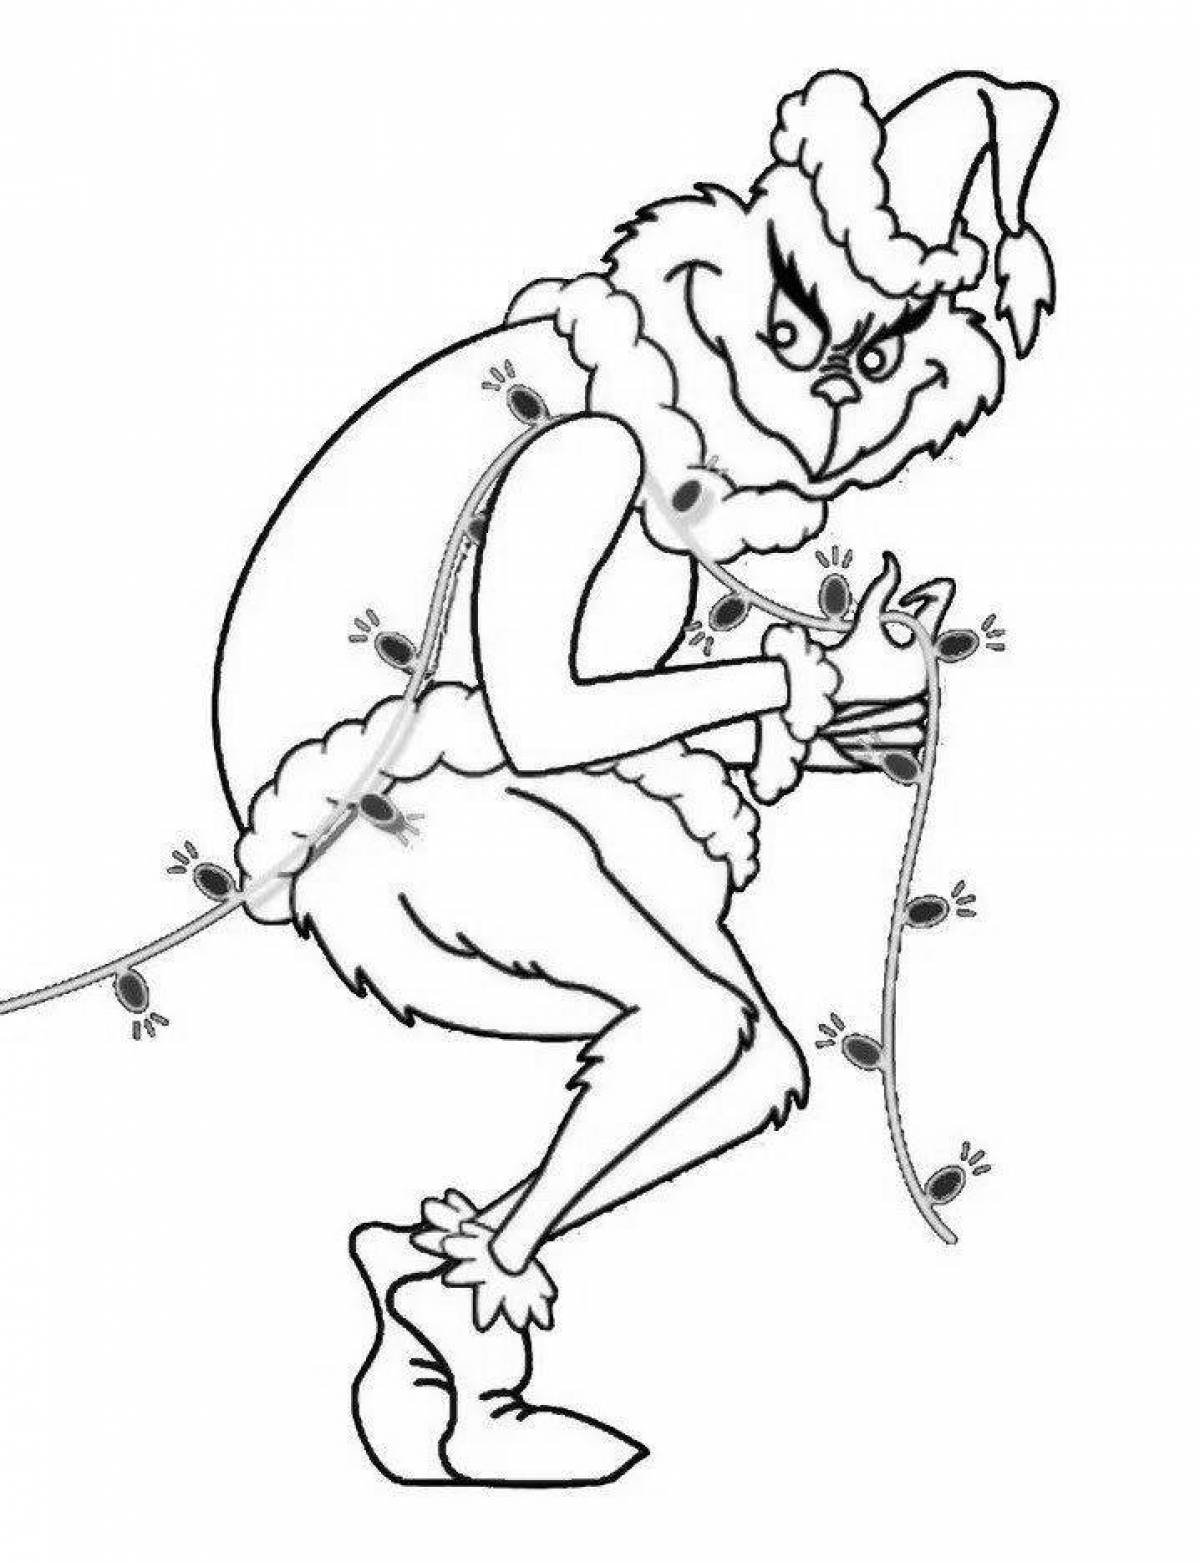 Rampant Grinch stole a Christmas coloring book